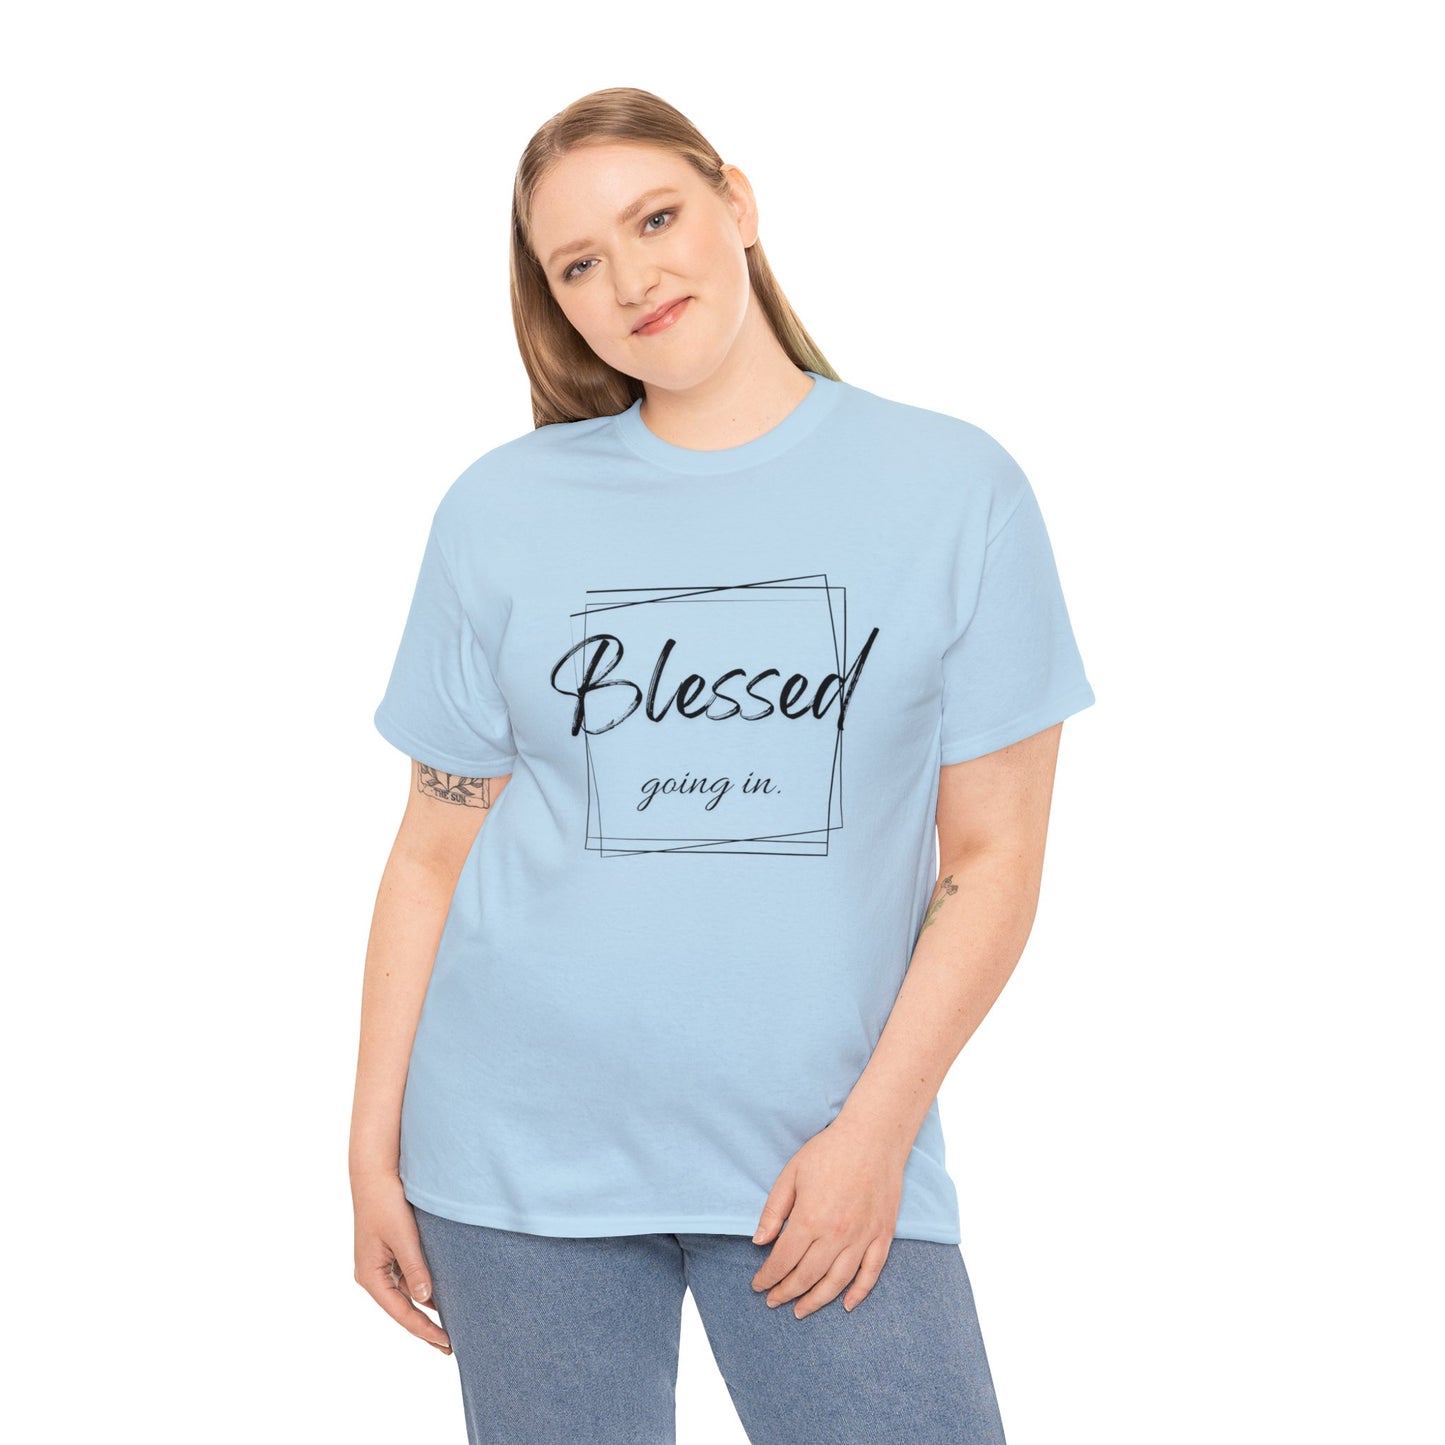 Blessed Going In, Blessed Going Out - Unisex Cotton Tee